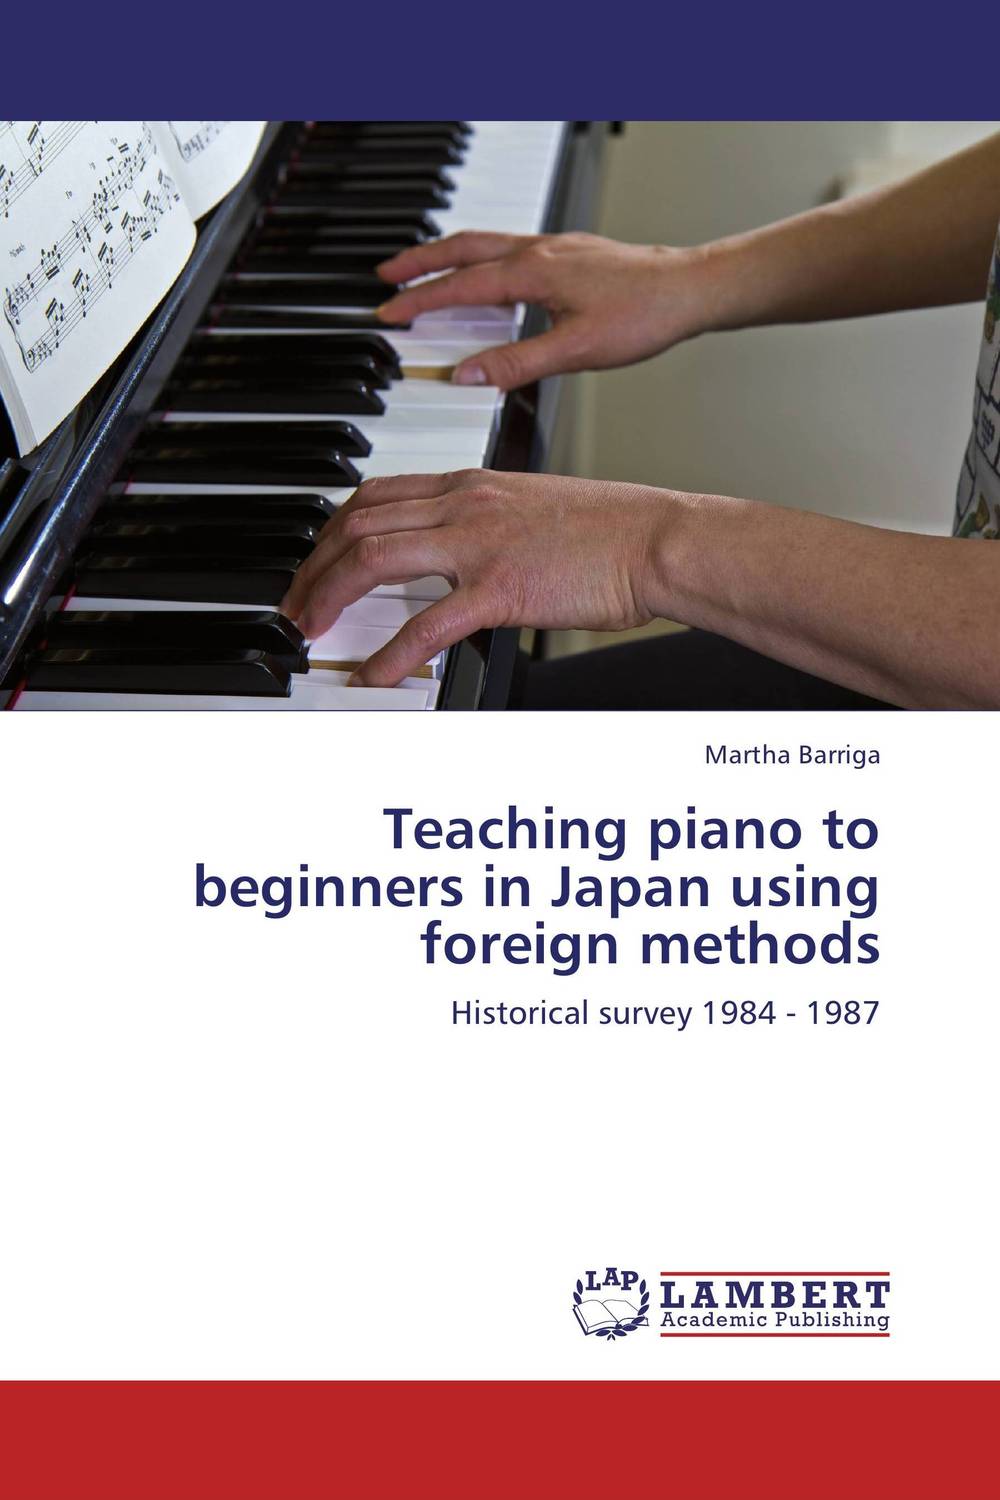 Teaching piano to beginners in Japan using foreign methods